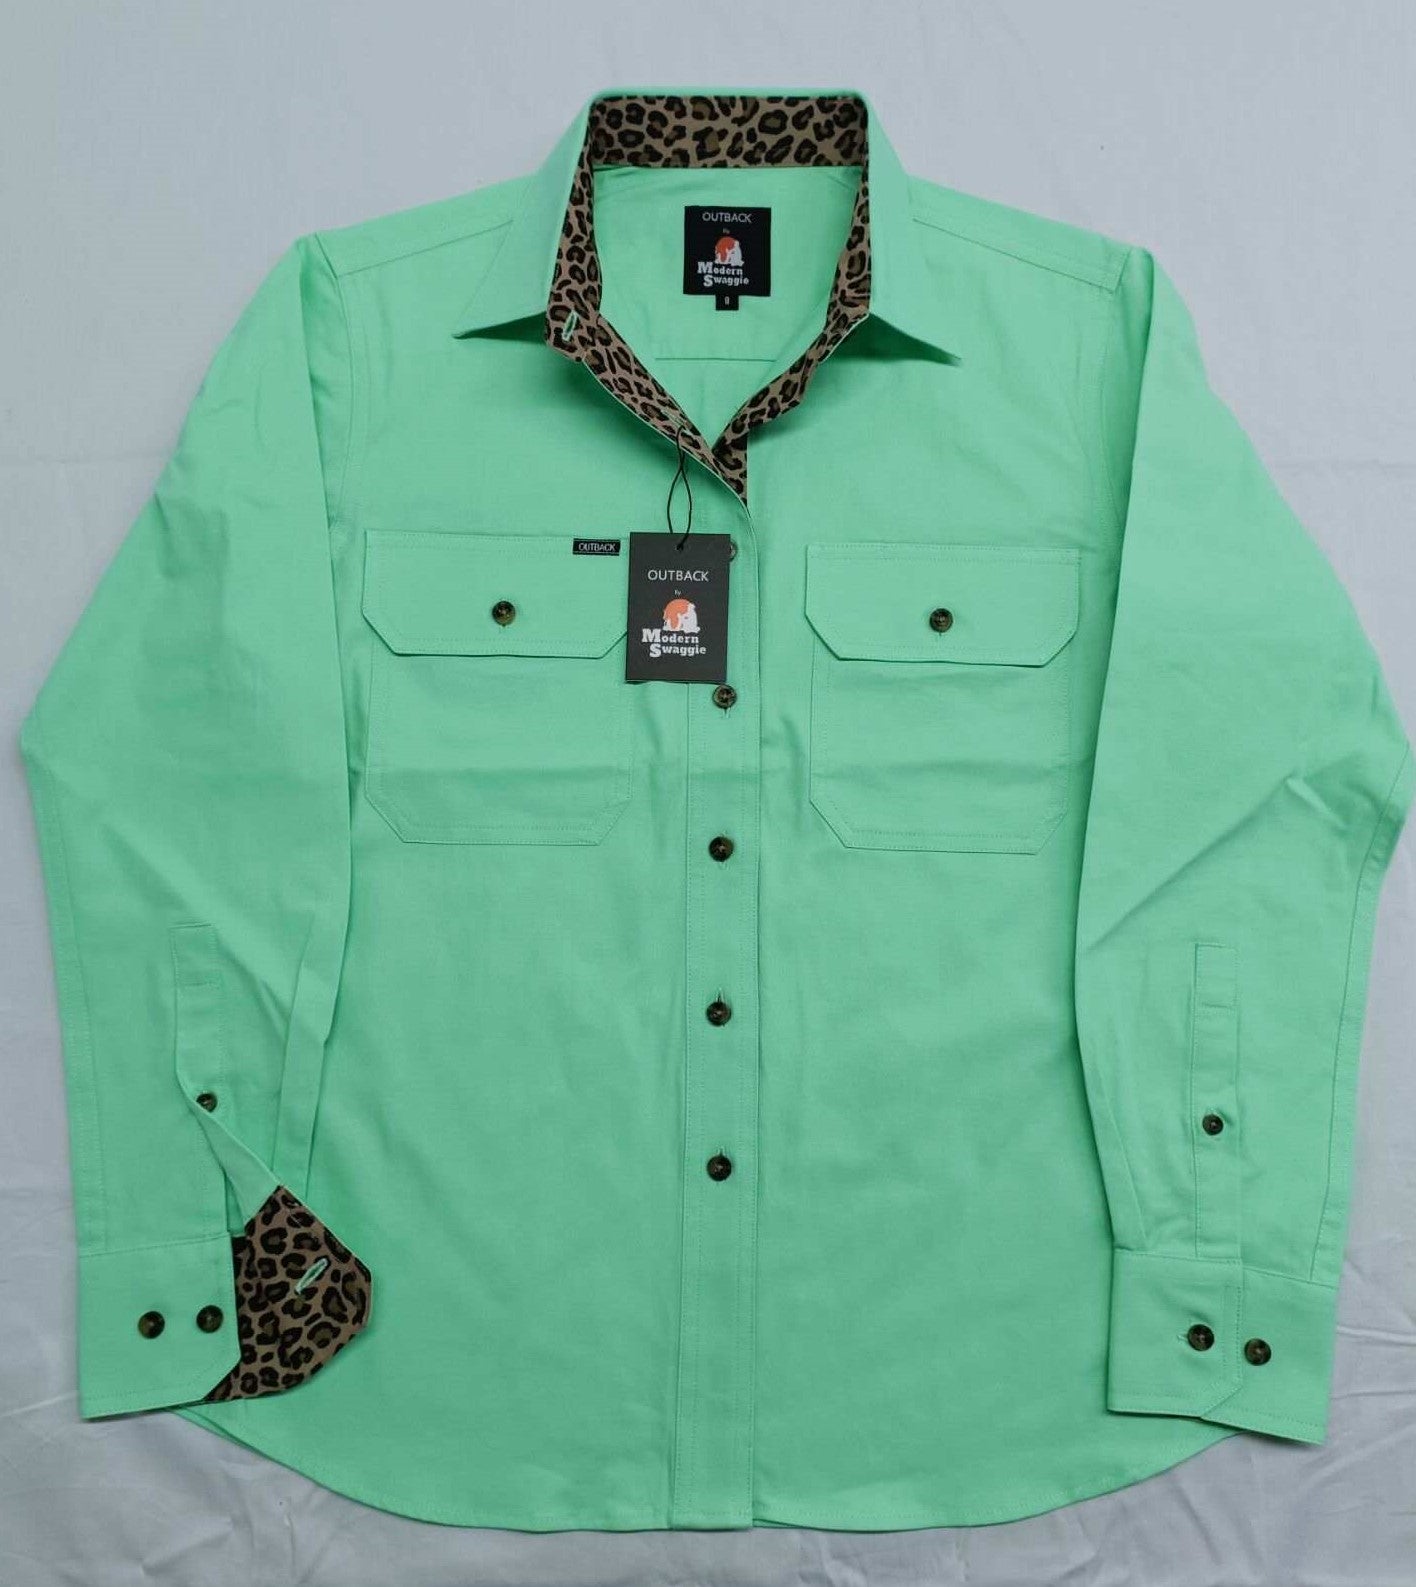 'Outback' Ladies KARUMBA Green Contrast Full Button Work Shirt